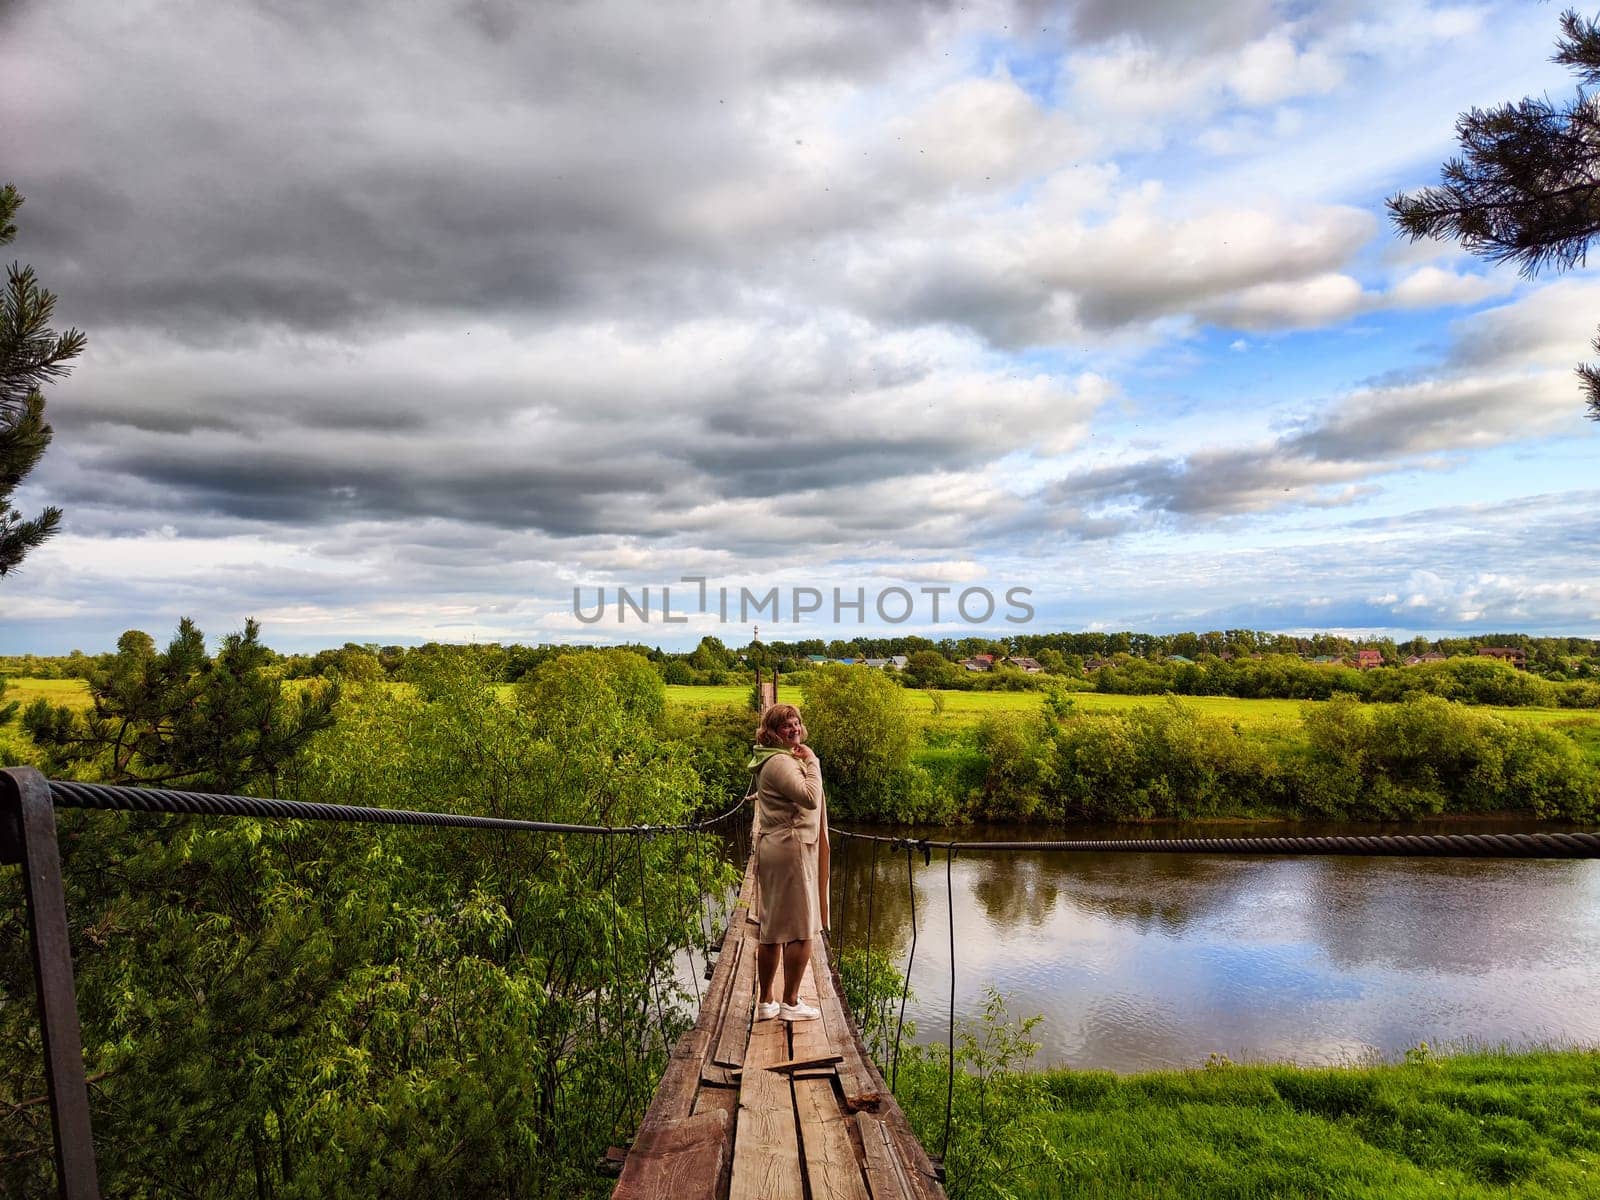 A tourist girl walks along an old wooden suspension bridge over the river and the sky with disturbing clouds. Suicide in nature. The concept of depression and hopelessness of life by keleny